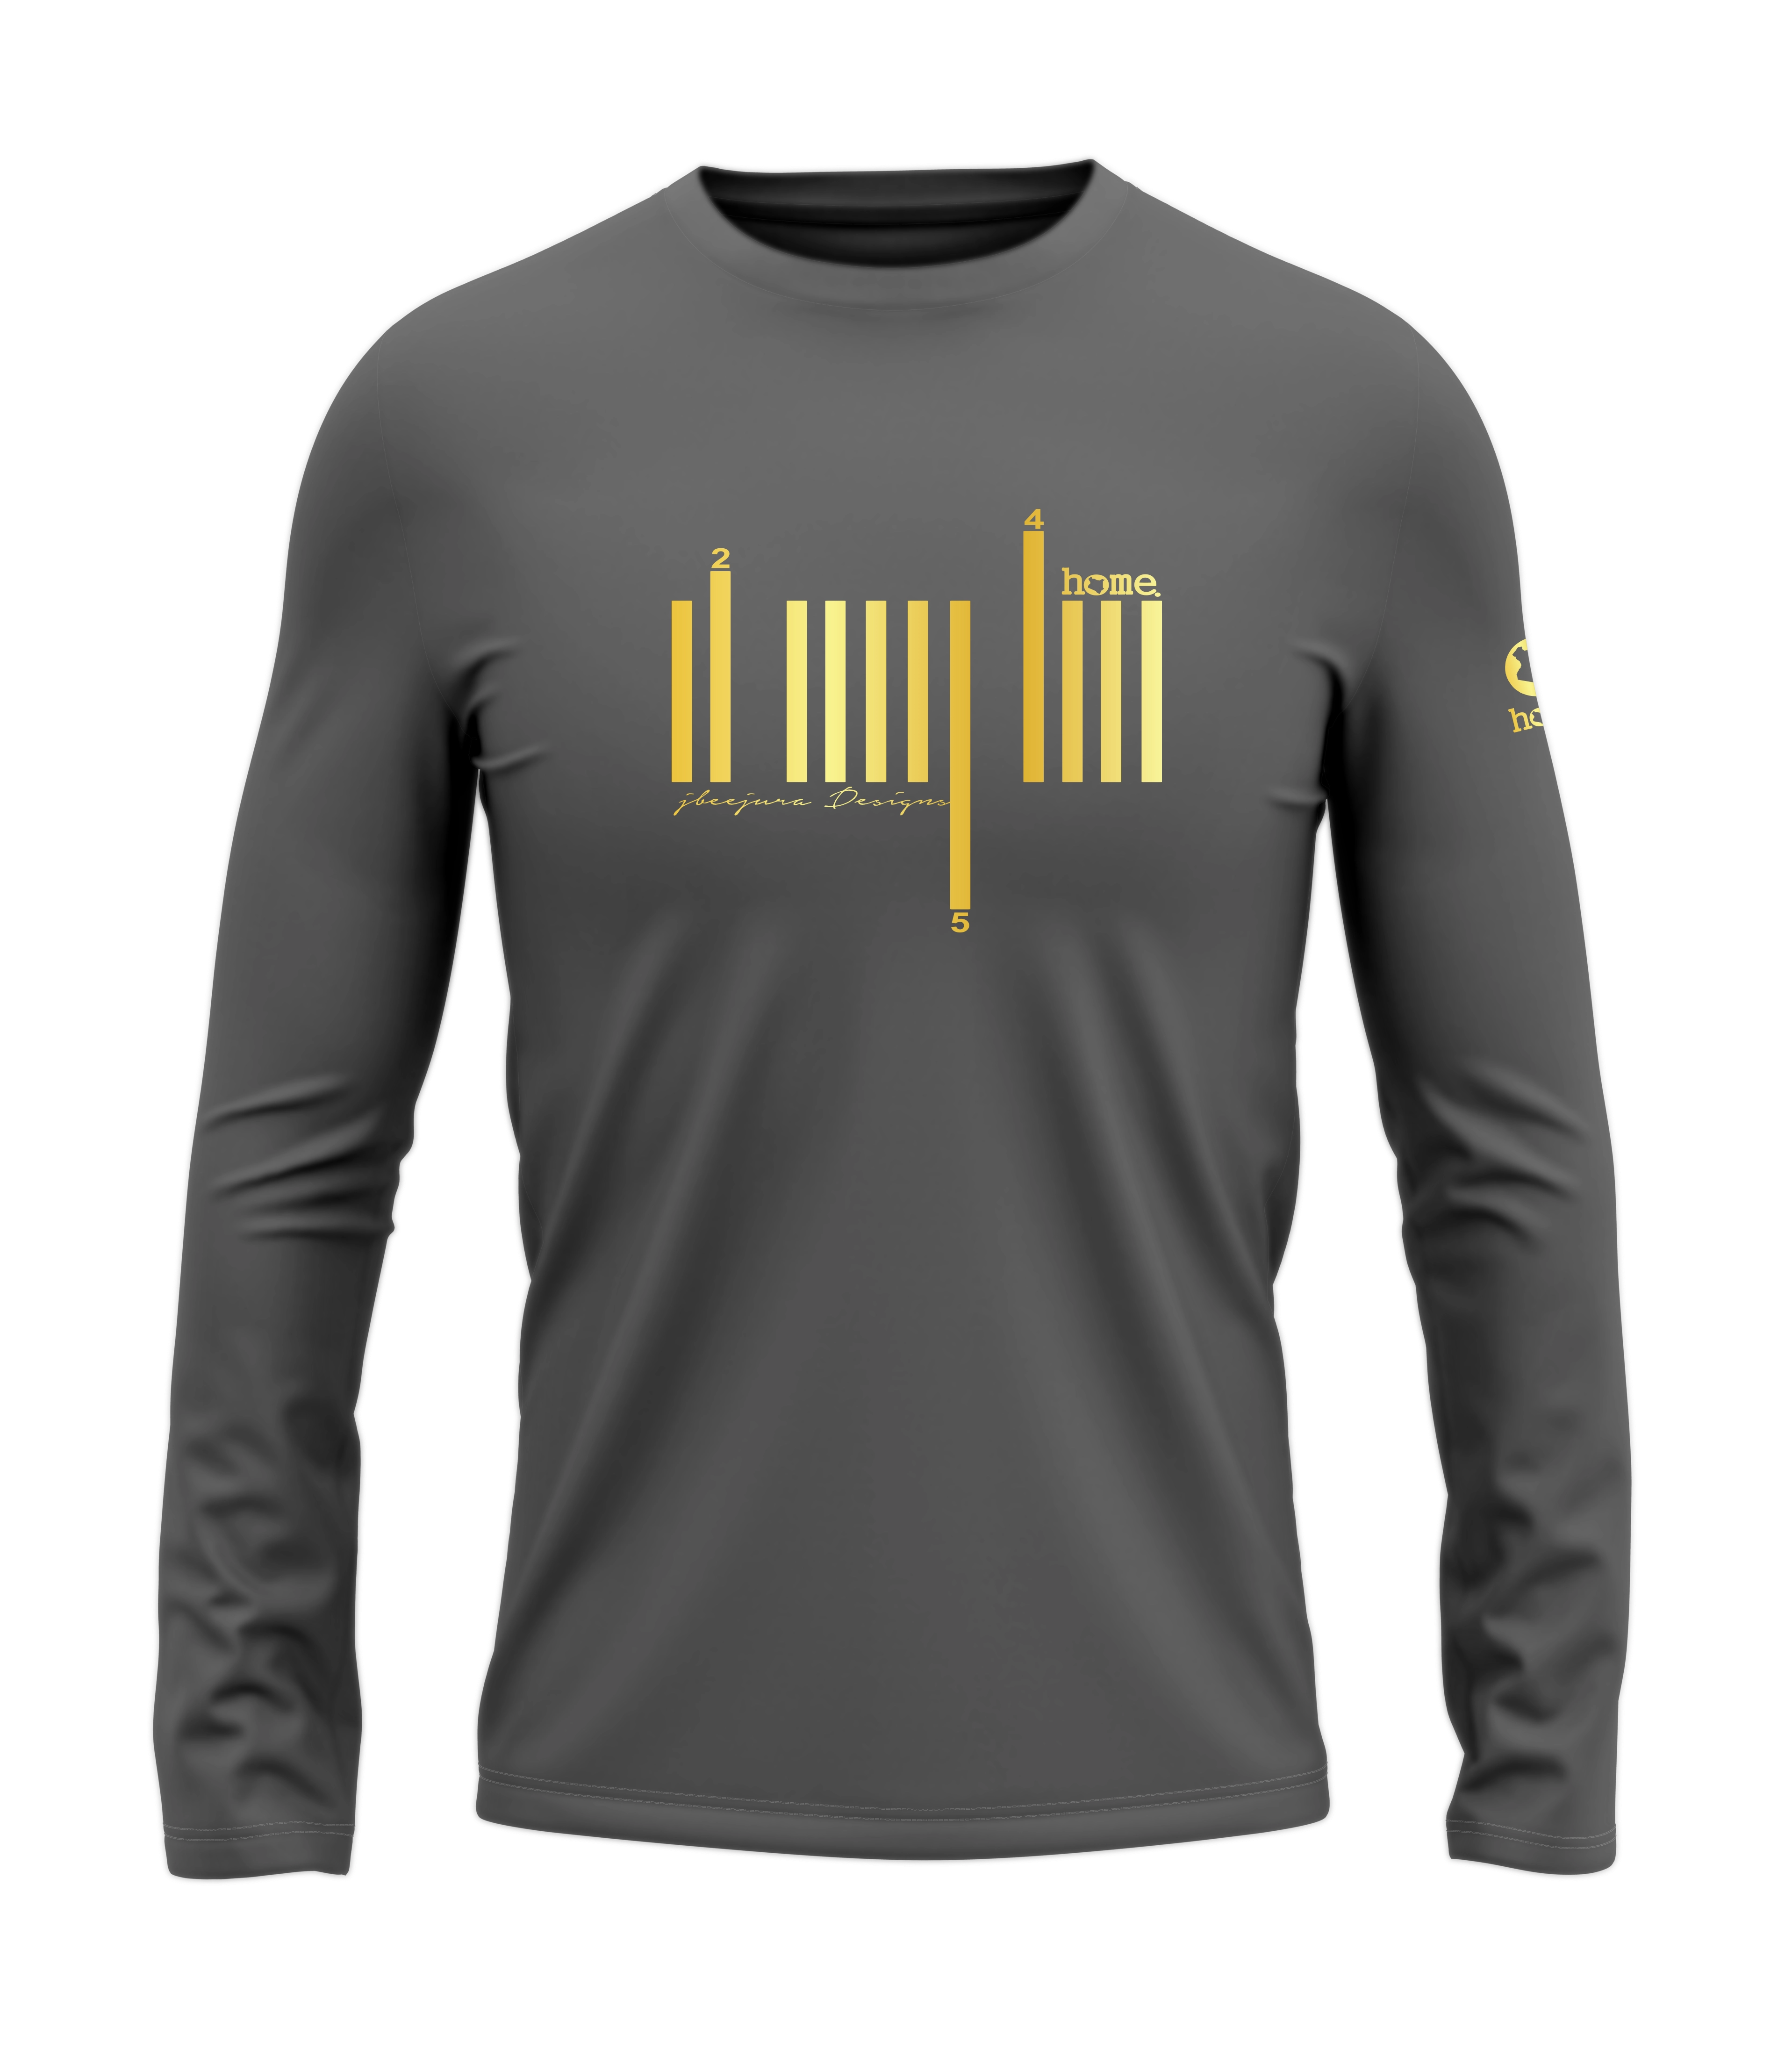 home_254 LONG-SLEEVED SAGE T-SHIRT WITH A GOLD BARS PRINT – COTTON PLUS FABRIC